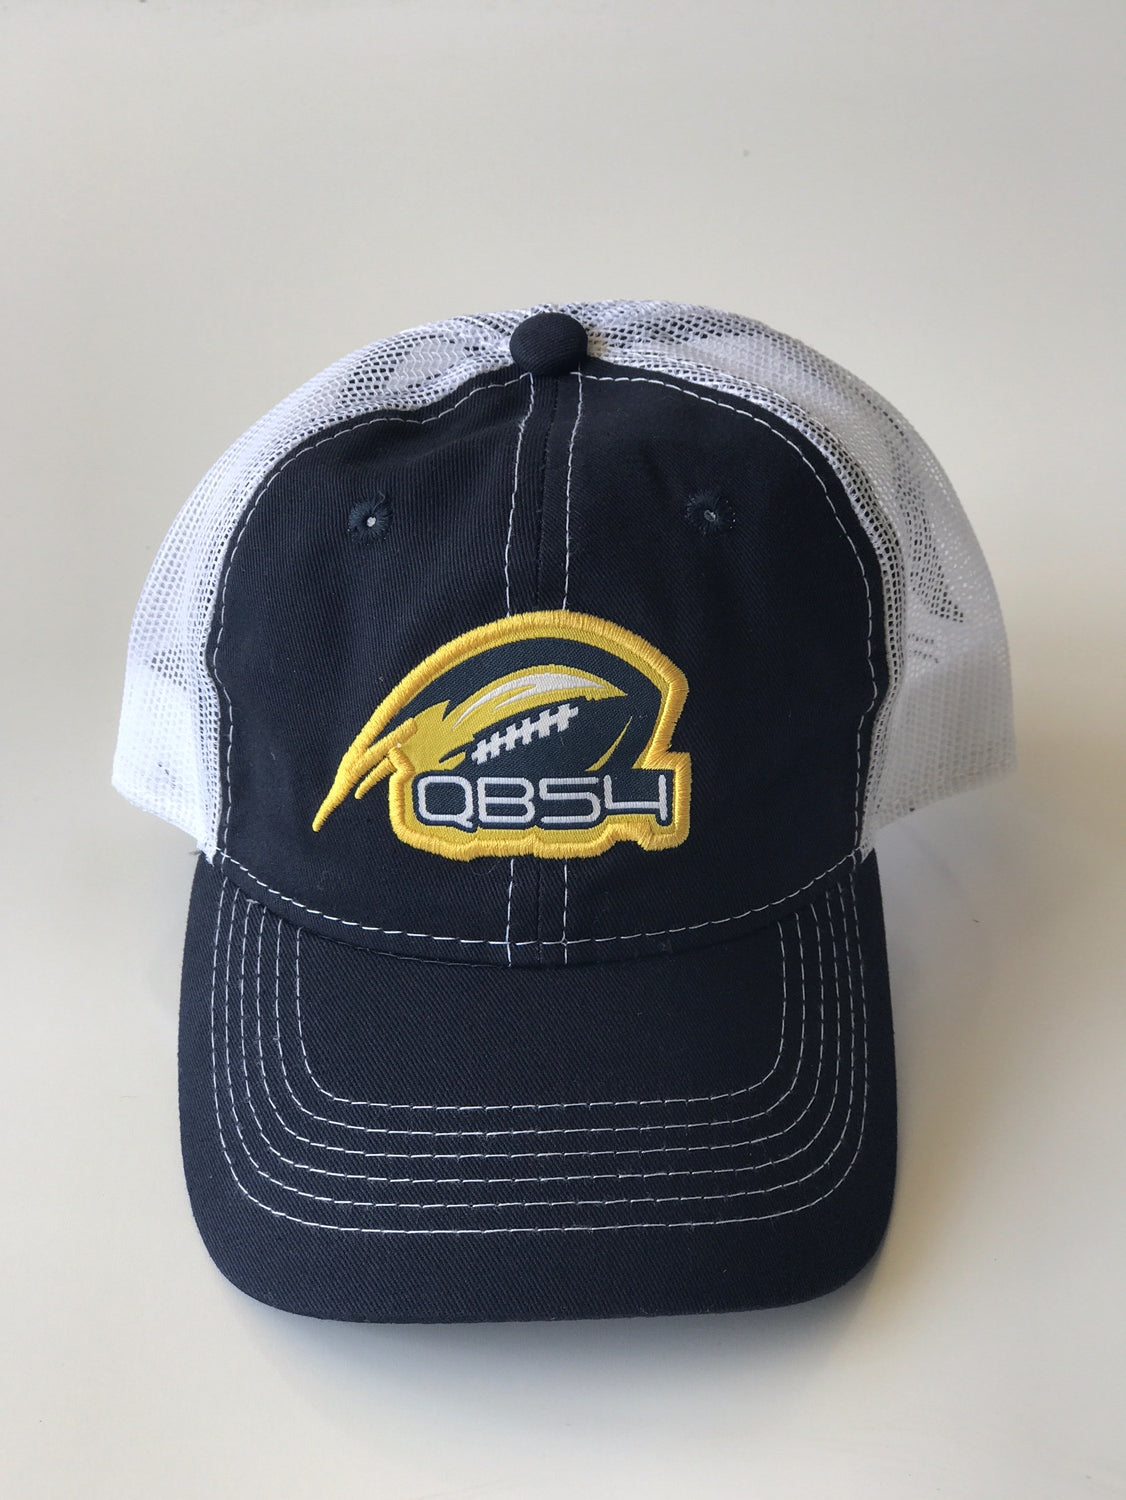 Trucker Hat for Outdoor & Tailgate Fun